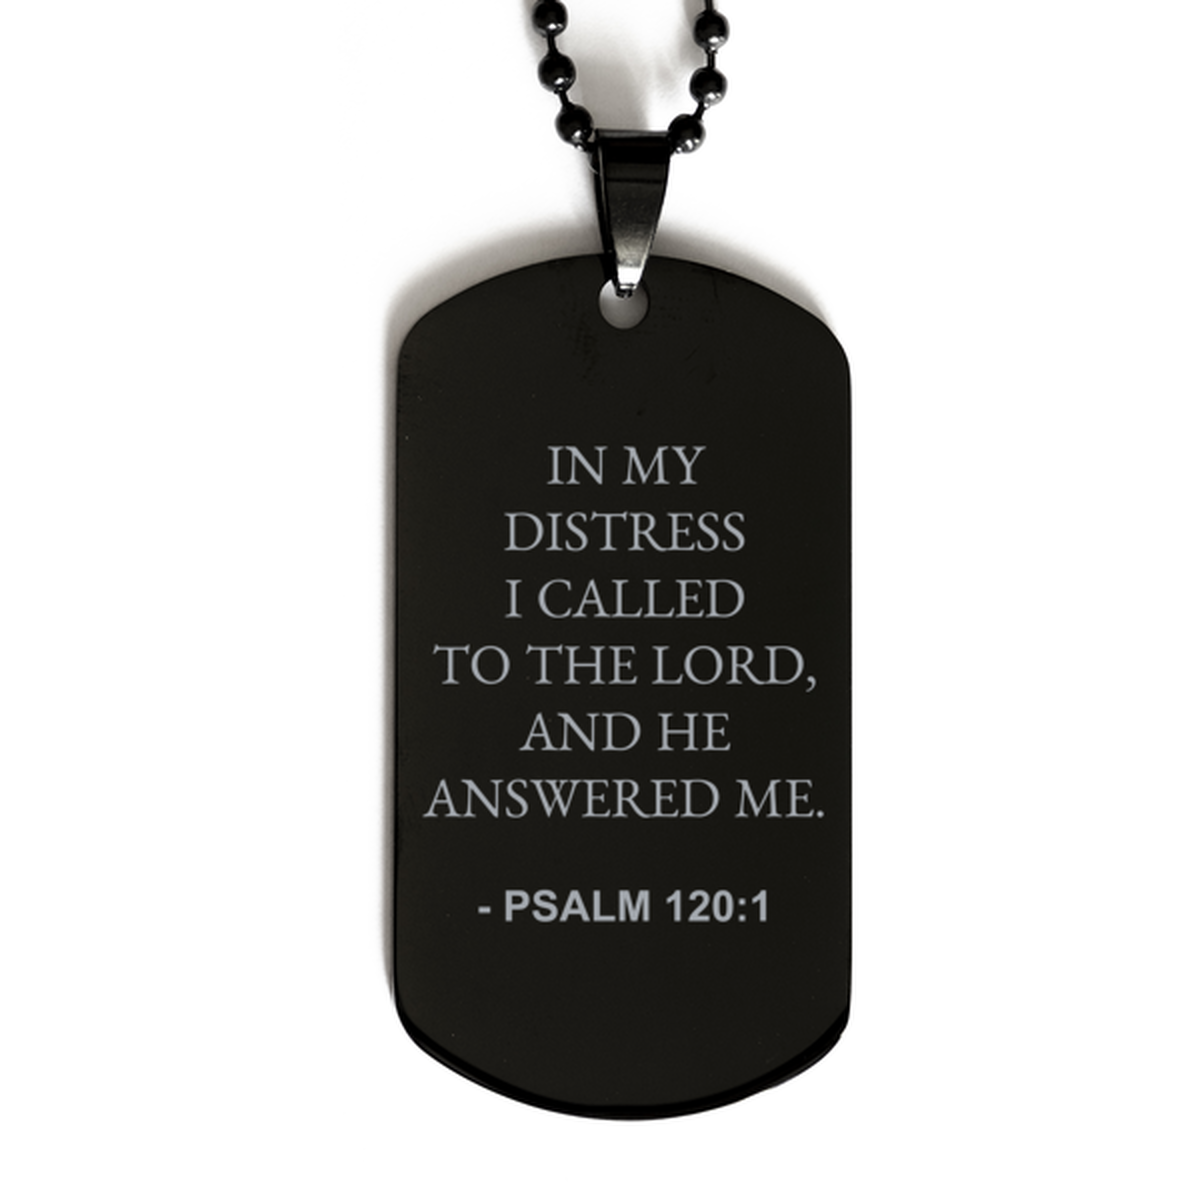 Bible Verse Black Dog Tag, Psalm 120:1 In My Distress I Called To The Lord, And He, Christian Inspirational Necklace Gifts For Men Women